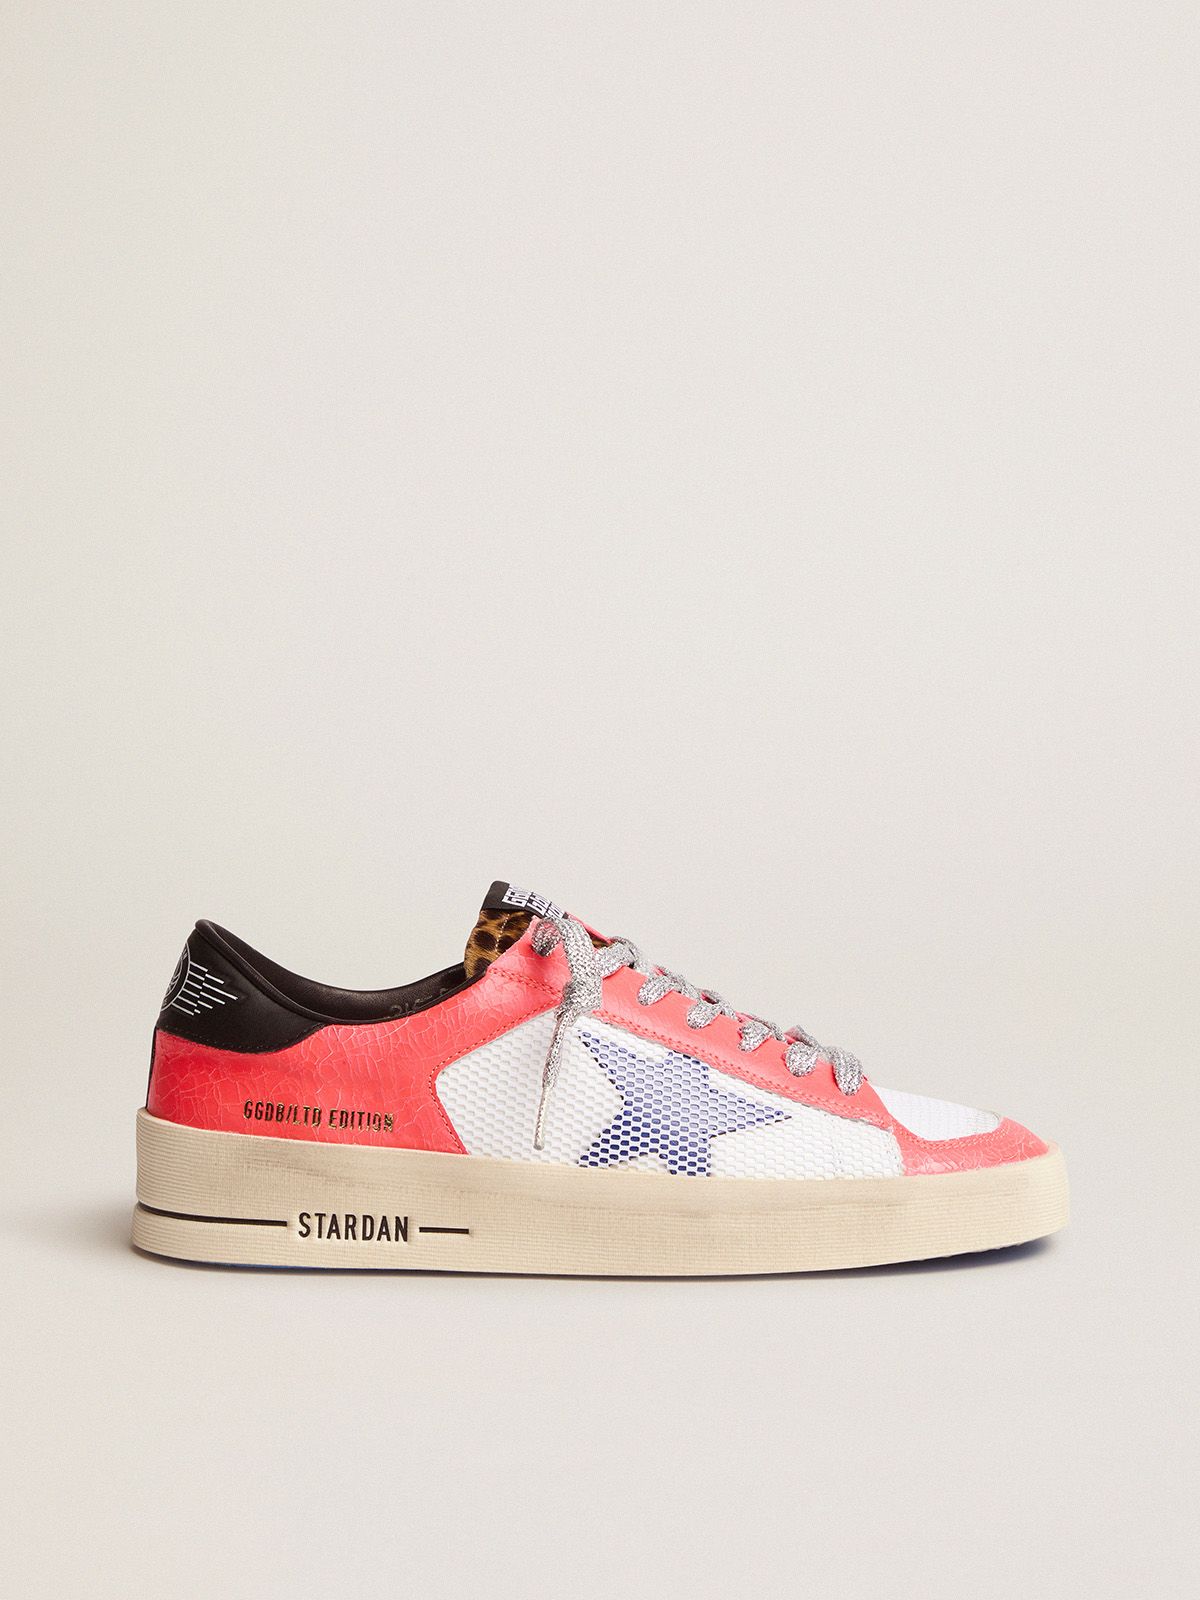 golden goose Women's sneakers Edition pony LAB skin leather and Limited in Stardan craquelé